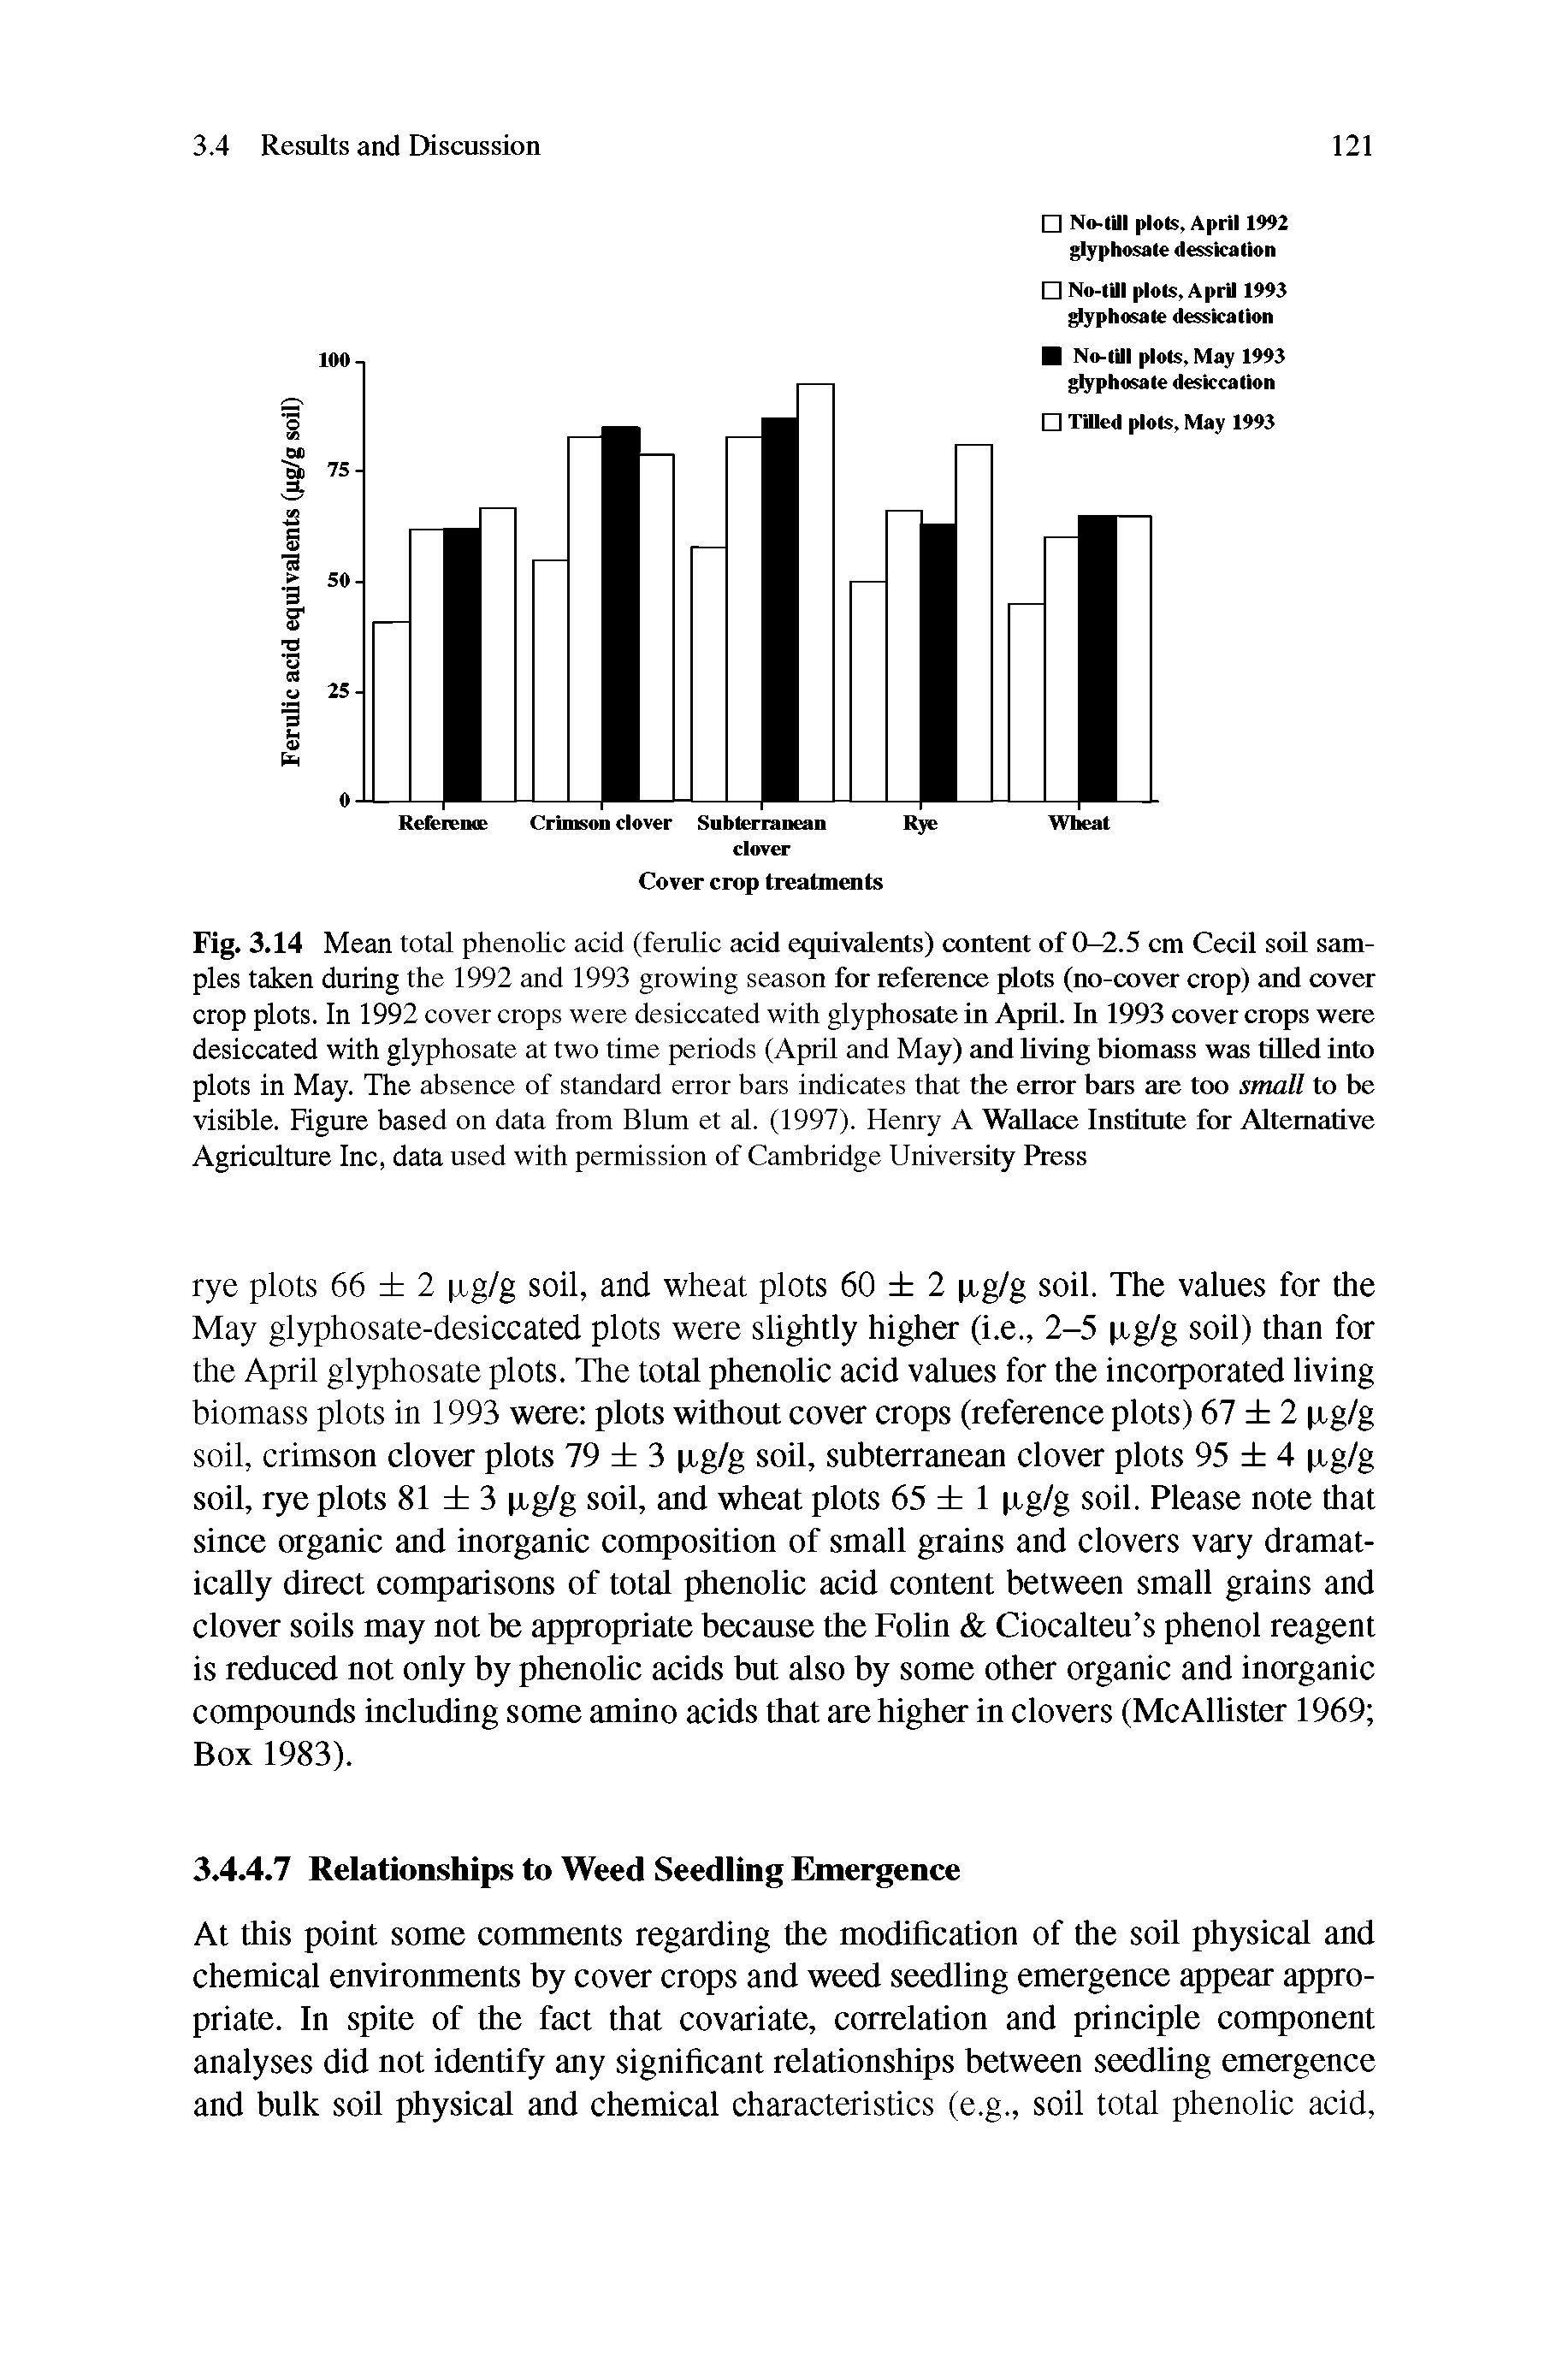 Fig. 3.14 Mean total phenolic acid (femlic acid equivalents) content of 0-2.5 cm Cecil soil samples taken during the 1992 and 1993 growing season for reference plots (no-cover crop) and cover crop plots. In 1992 cover crops were desiccated with glyphosate in April. In 1993 cover crops were desiccated with glyphosate at two time periods (April and May) and living biomass was tilled into plots in May. The absence of standard error bars indicates that the error bars are too small to be visible. Figure based on data from Blum et al. (1997). Henry A Wallace Institute for Alternative Agriculture Inc, data used with permission of Cambridge University Press...